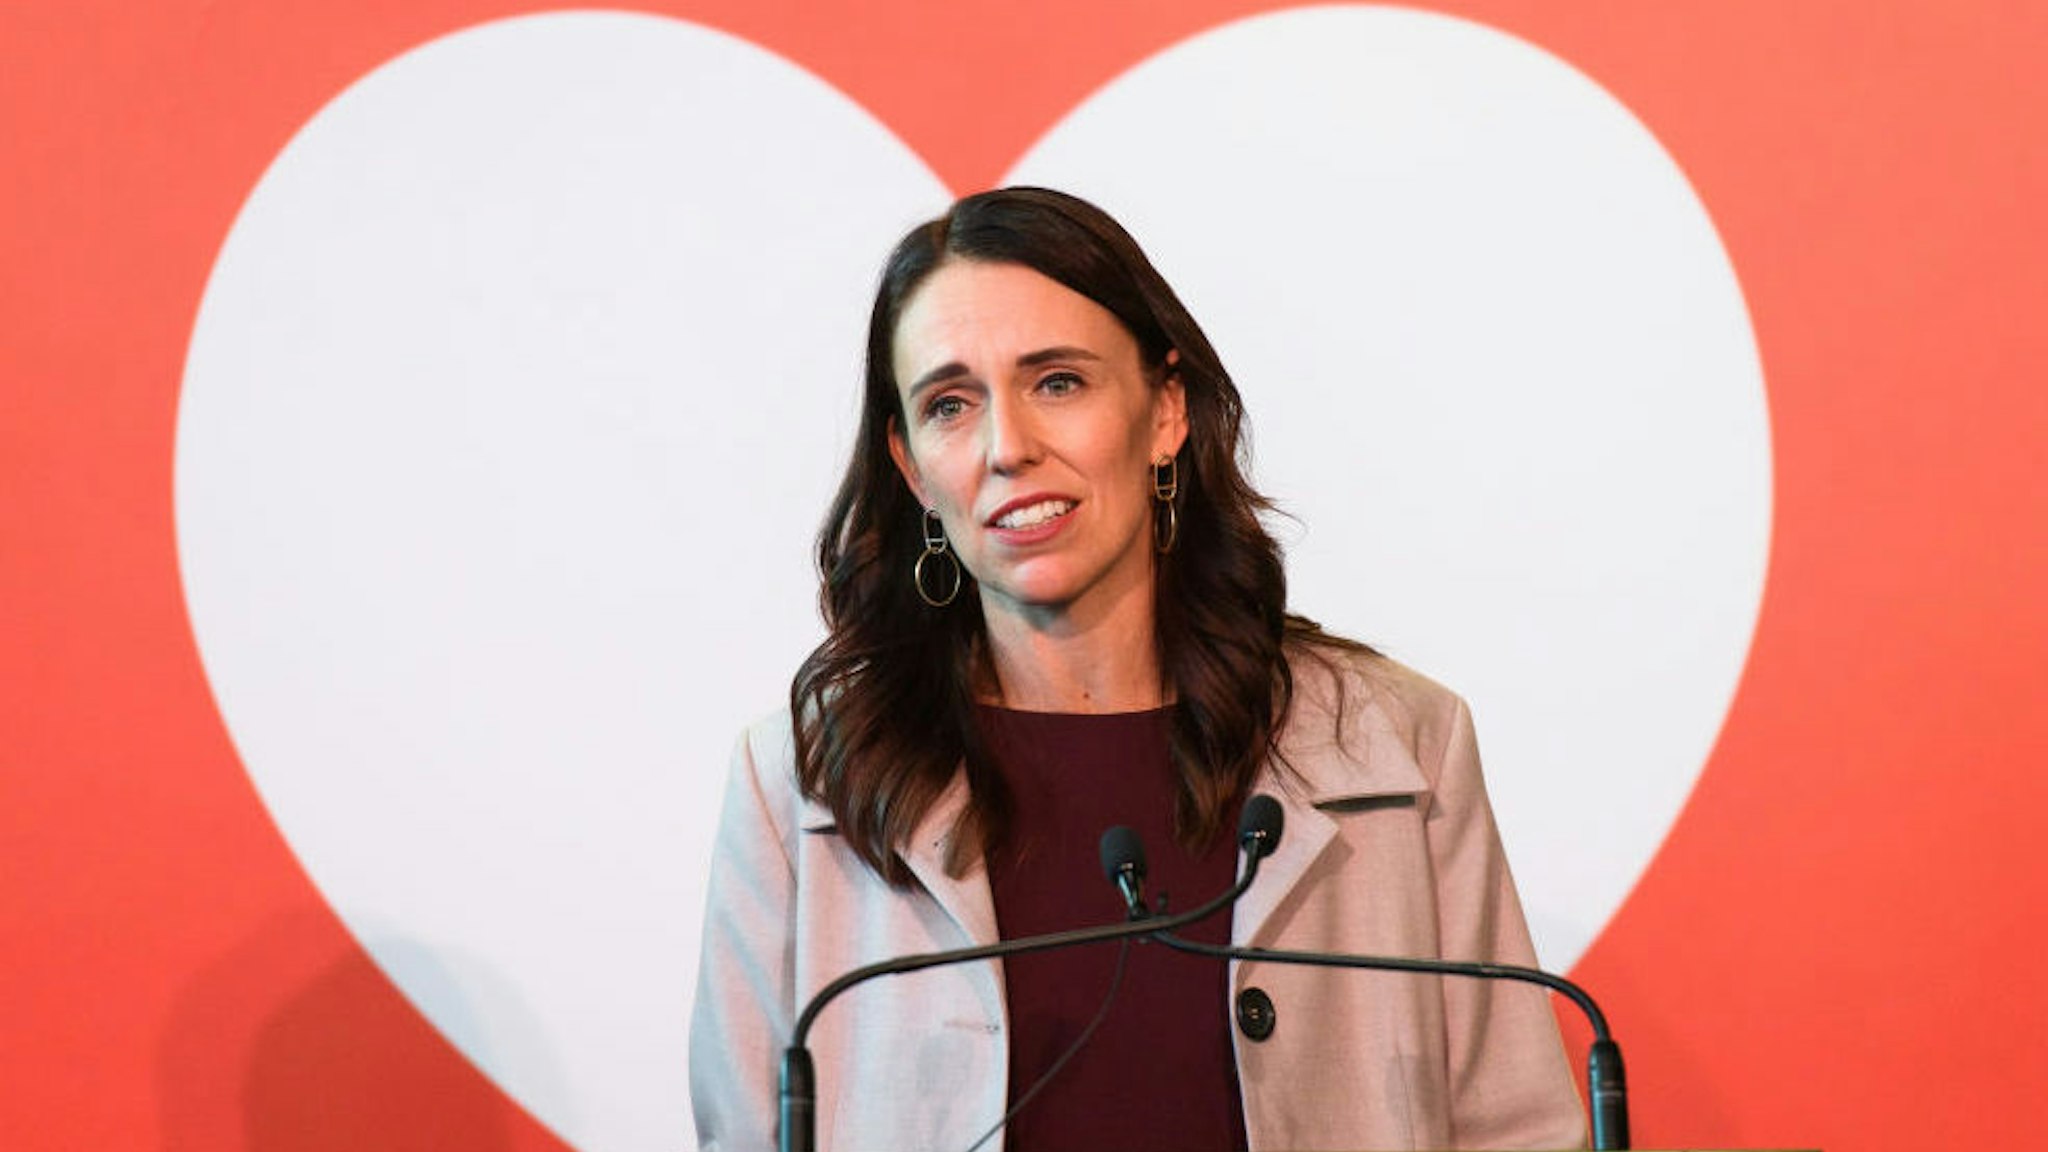 In the handout image provided by Wellington International Airport, New Zealand Prime Minister Jacinda Ardern speaks to the media at the reception for the first Trans-Tasman bubble flight from Australia to Wellington on April 19, 2021 in Wellington, New Zealand.